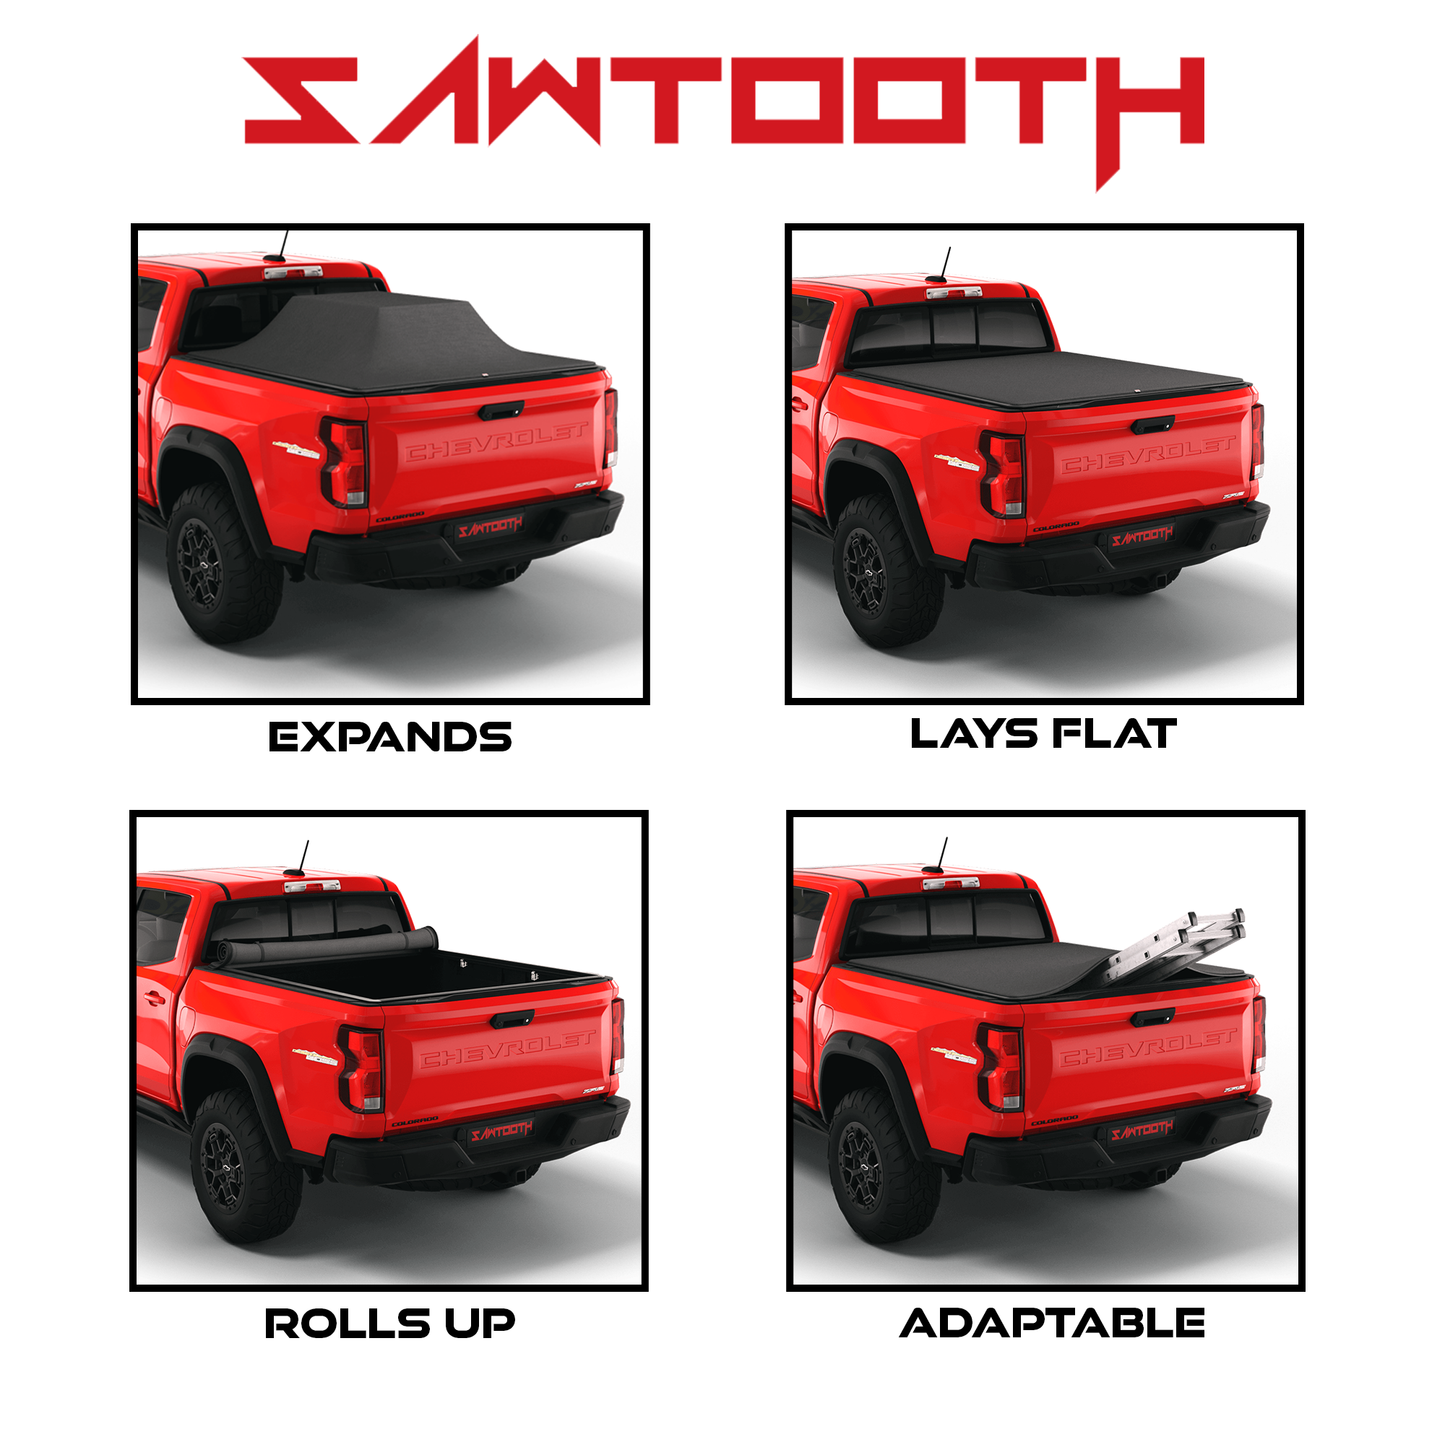 Sawtooth Expandable Truck Bed Cover Positions